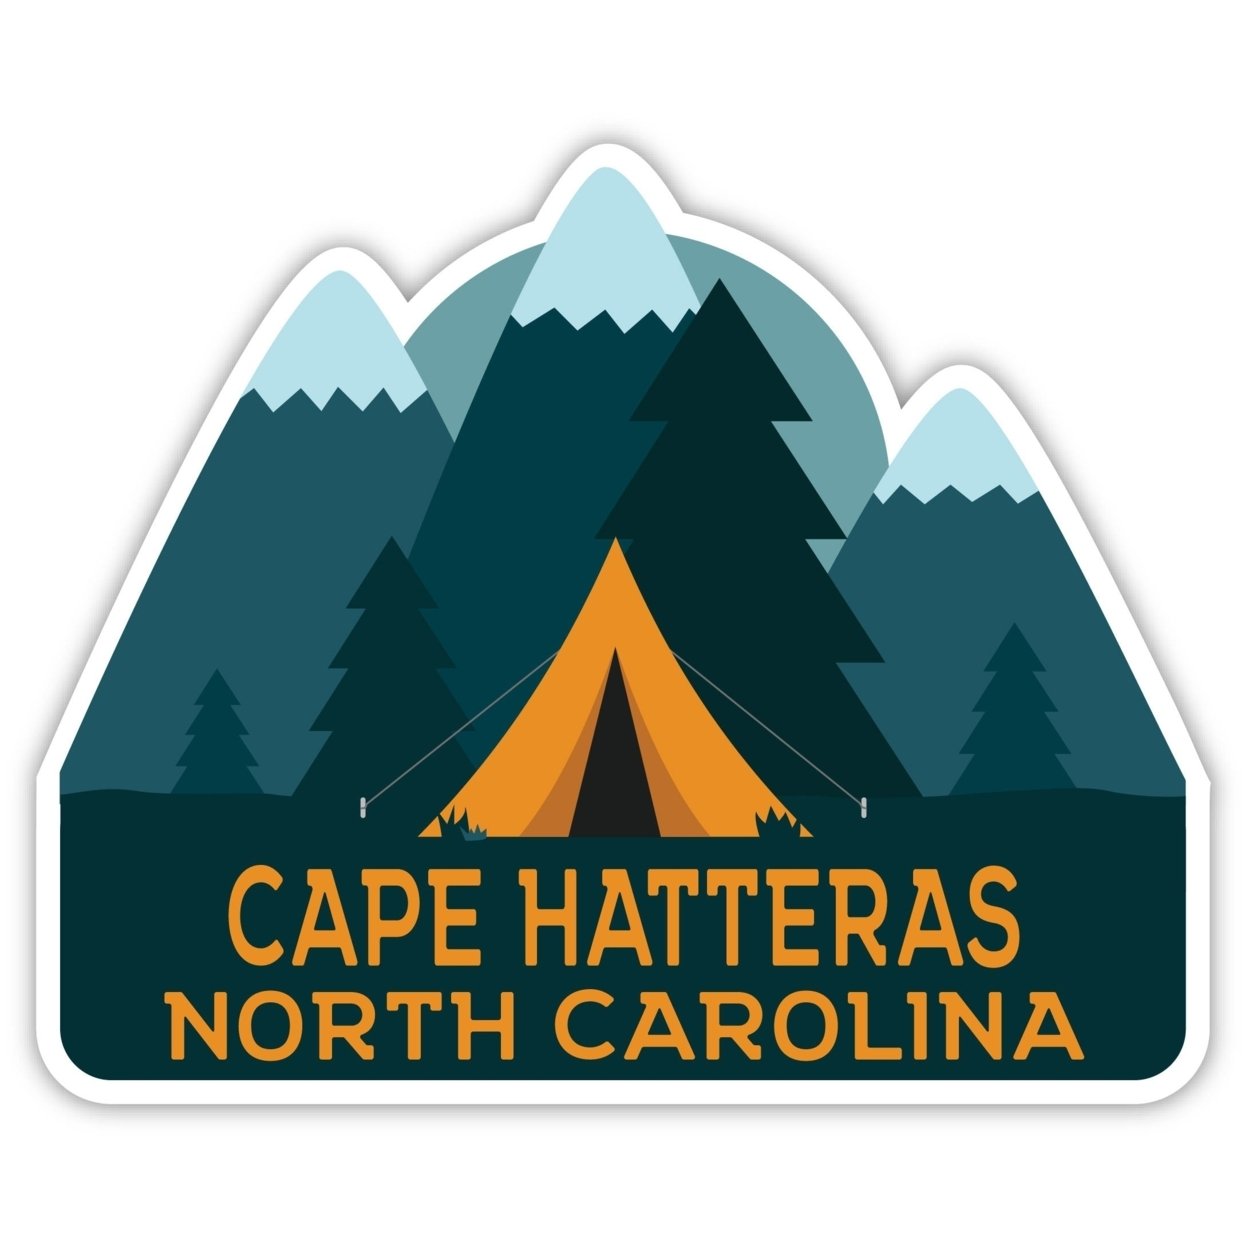 Cape Hatteras North Carolina Souvenir Decorative Stickers (Choose Theme And Size) - 4-Pack, 2-Inch, Tent